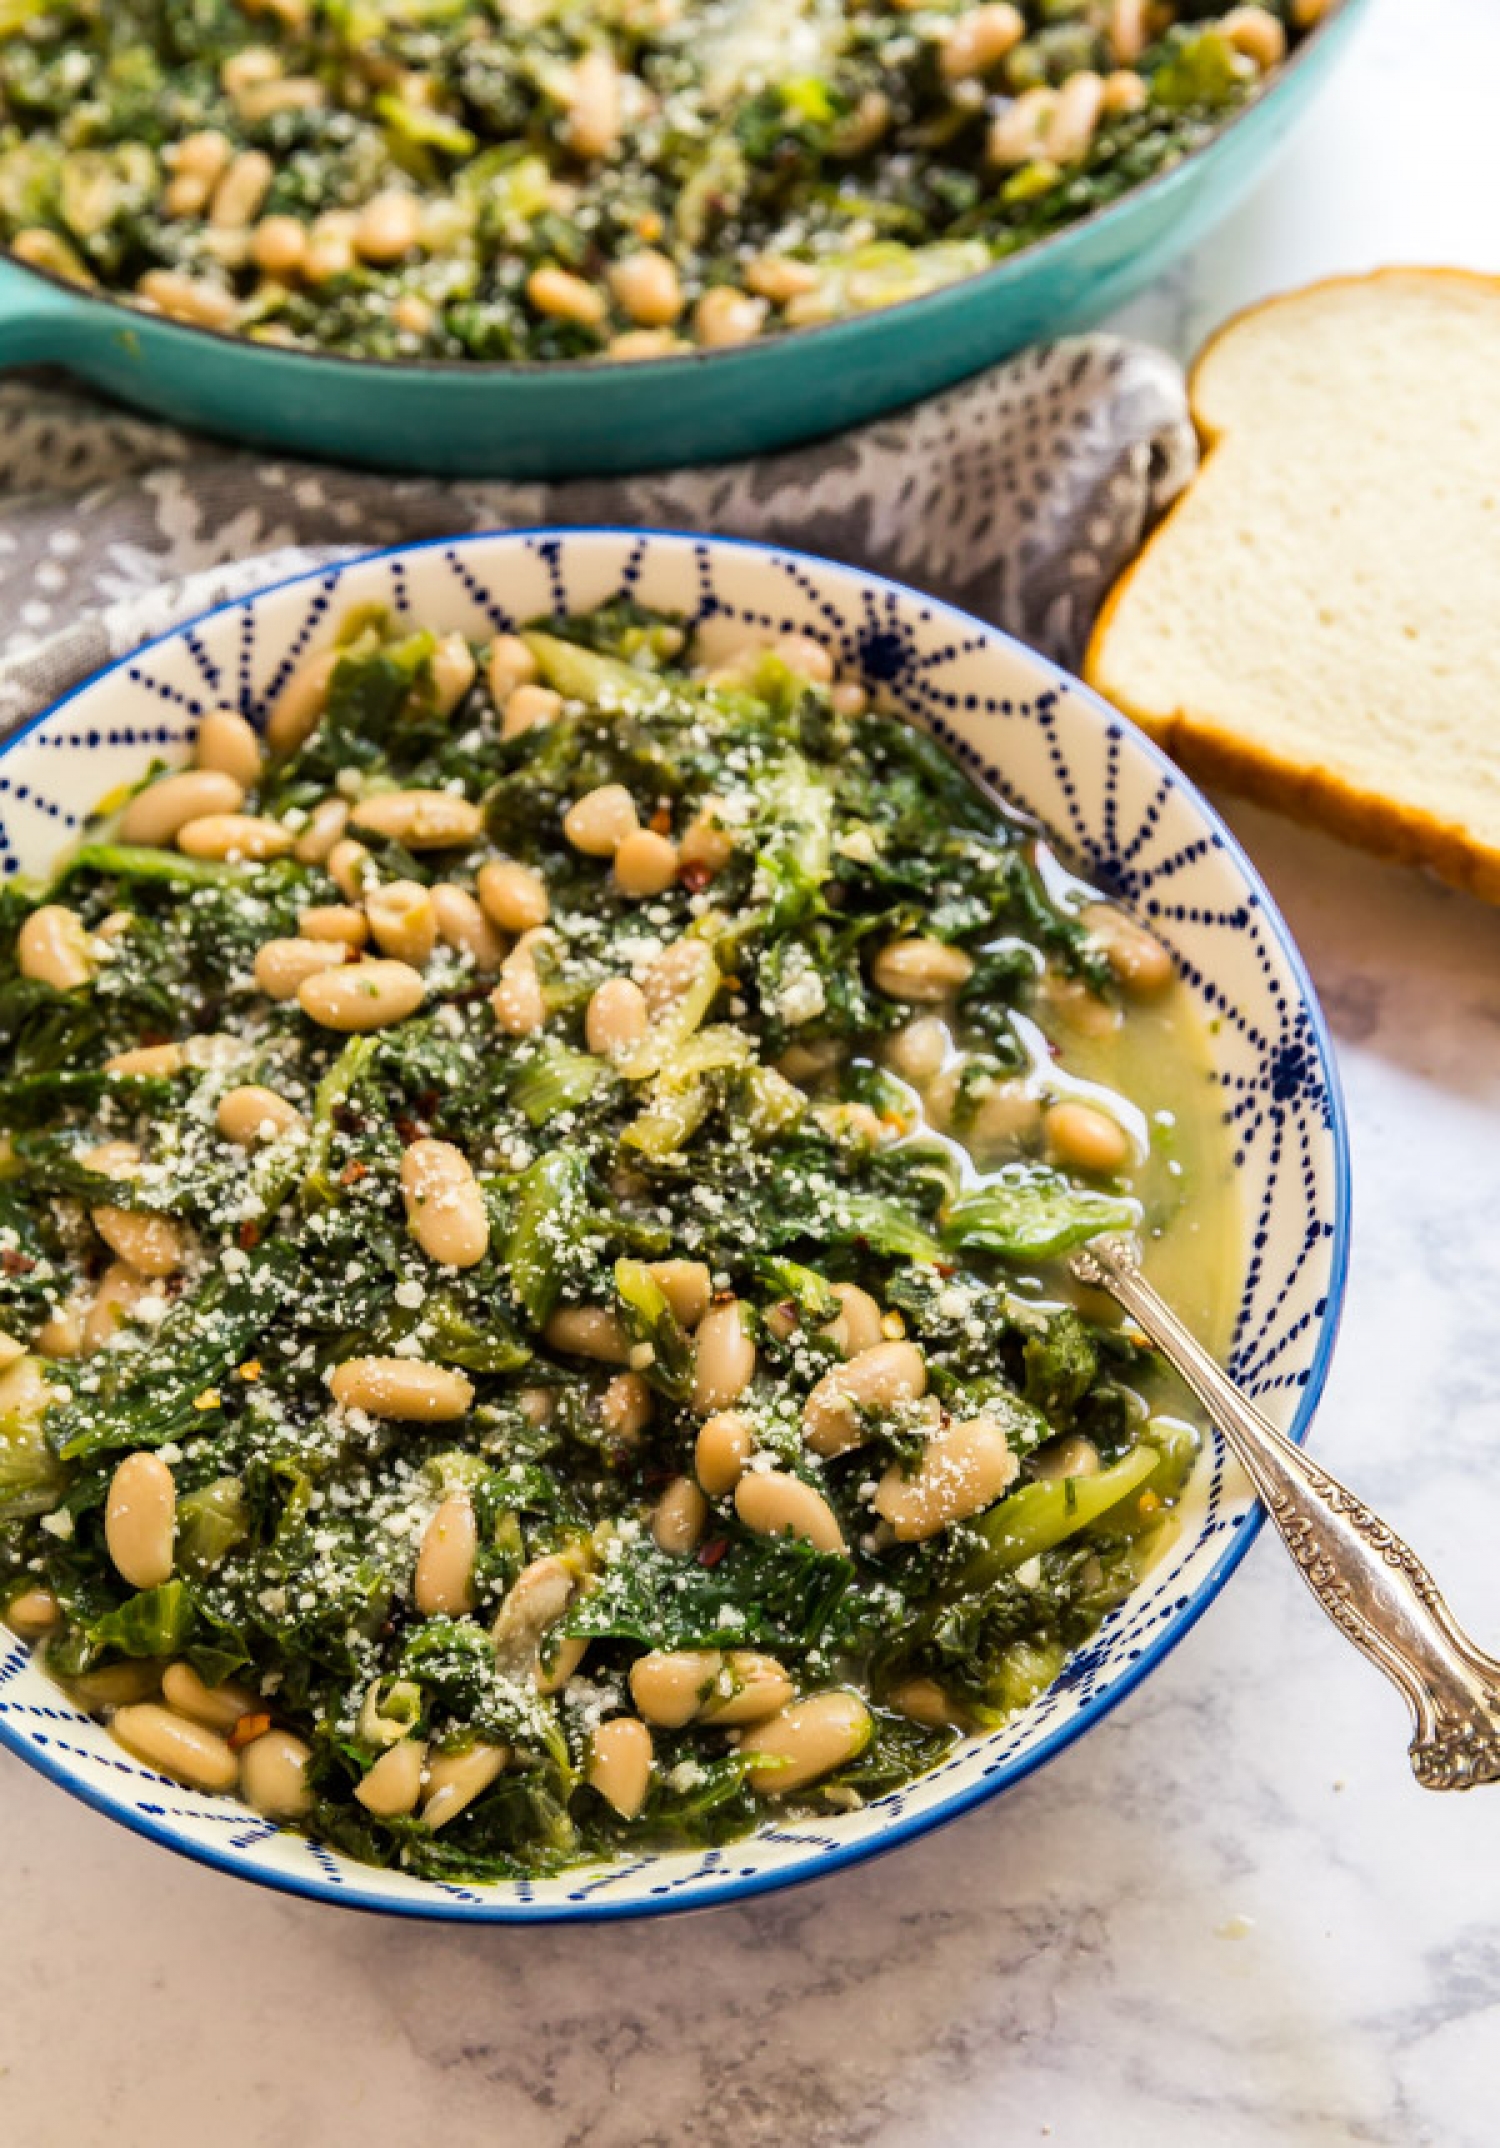 <p>Getting your greens is easy, thanks to <a href="https://www.thelifejolie.com/greens-and-beans/" rel="noopener">this healthy and satisfying Italian recipe</a> that pairs escarole with cannellini beans, garlic and romano cheese. Serve it as a tasty side or light meal when you need some balance.</p>